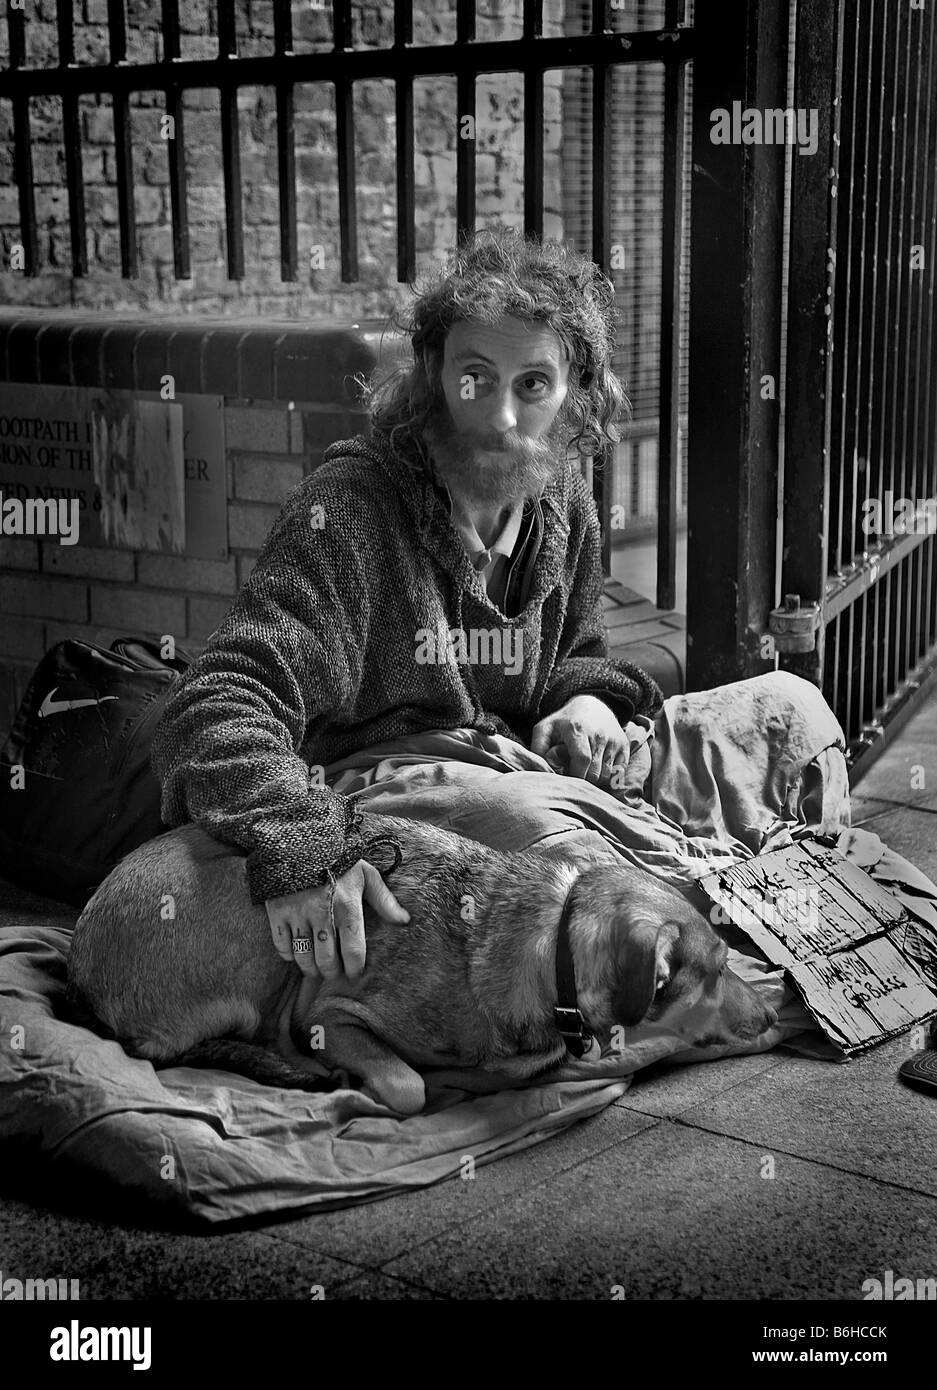 A homeless person and dog begging on the streets of London Stock Photo ...